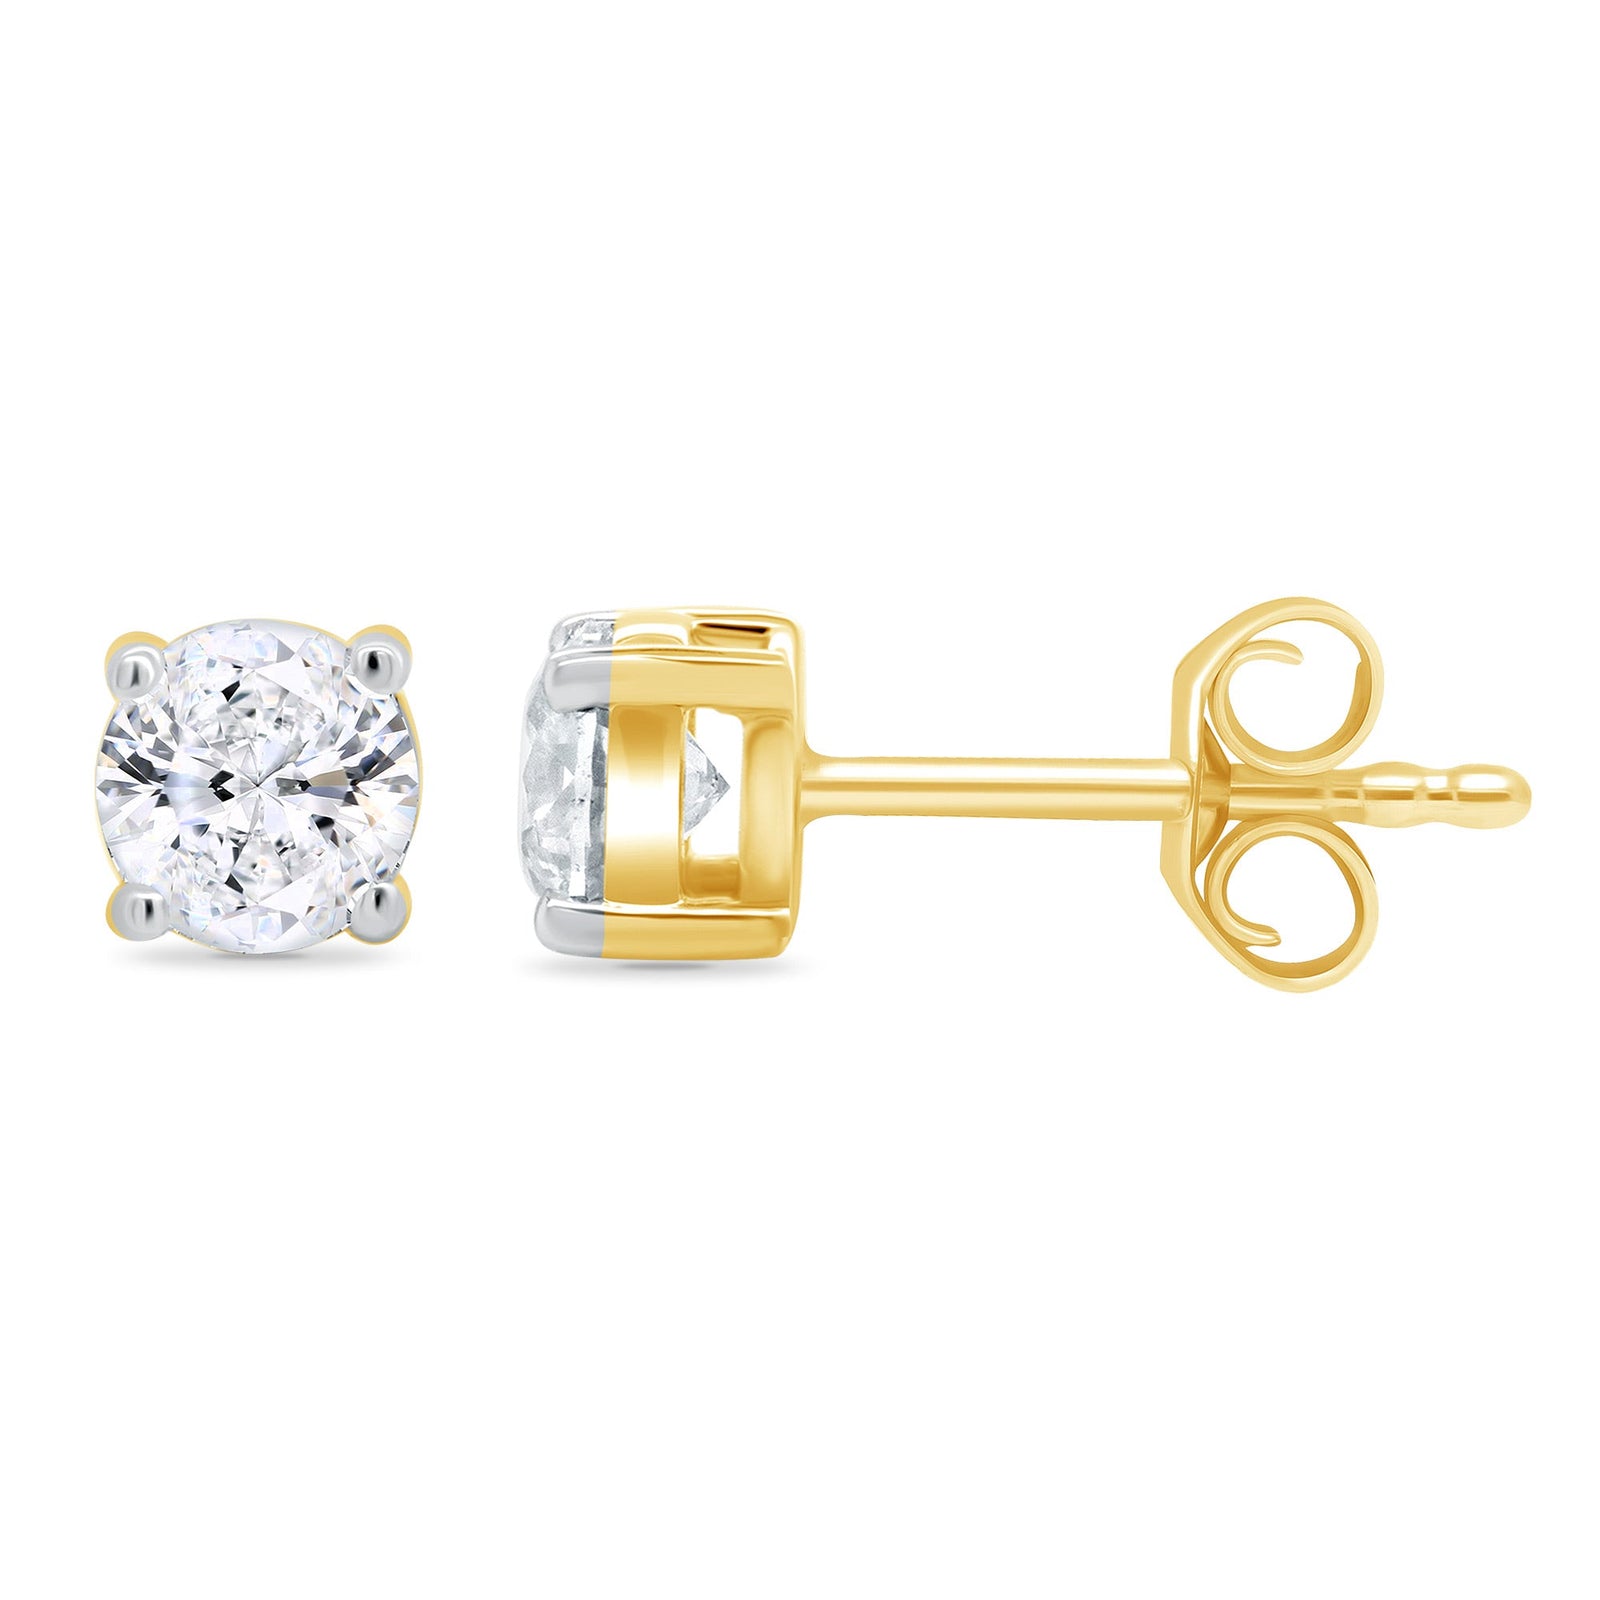 9ct gold four claw diamond stud earrings 0.25ct